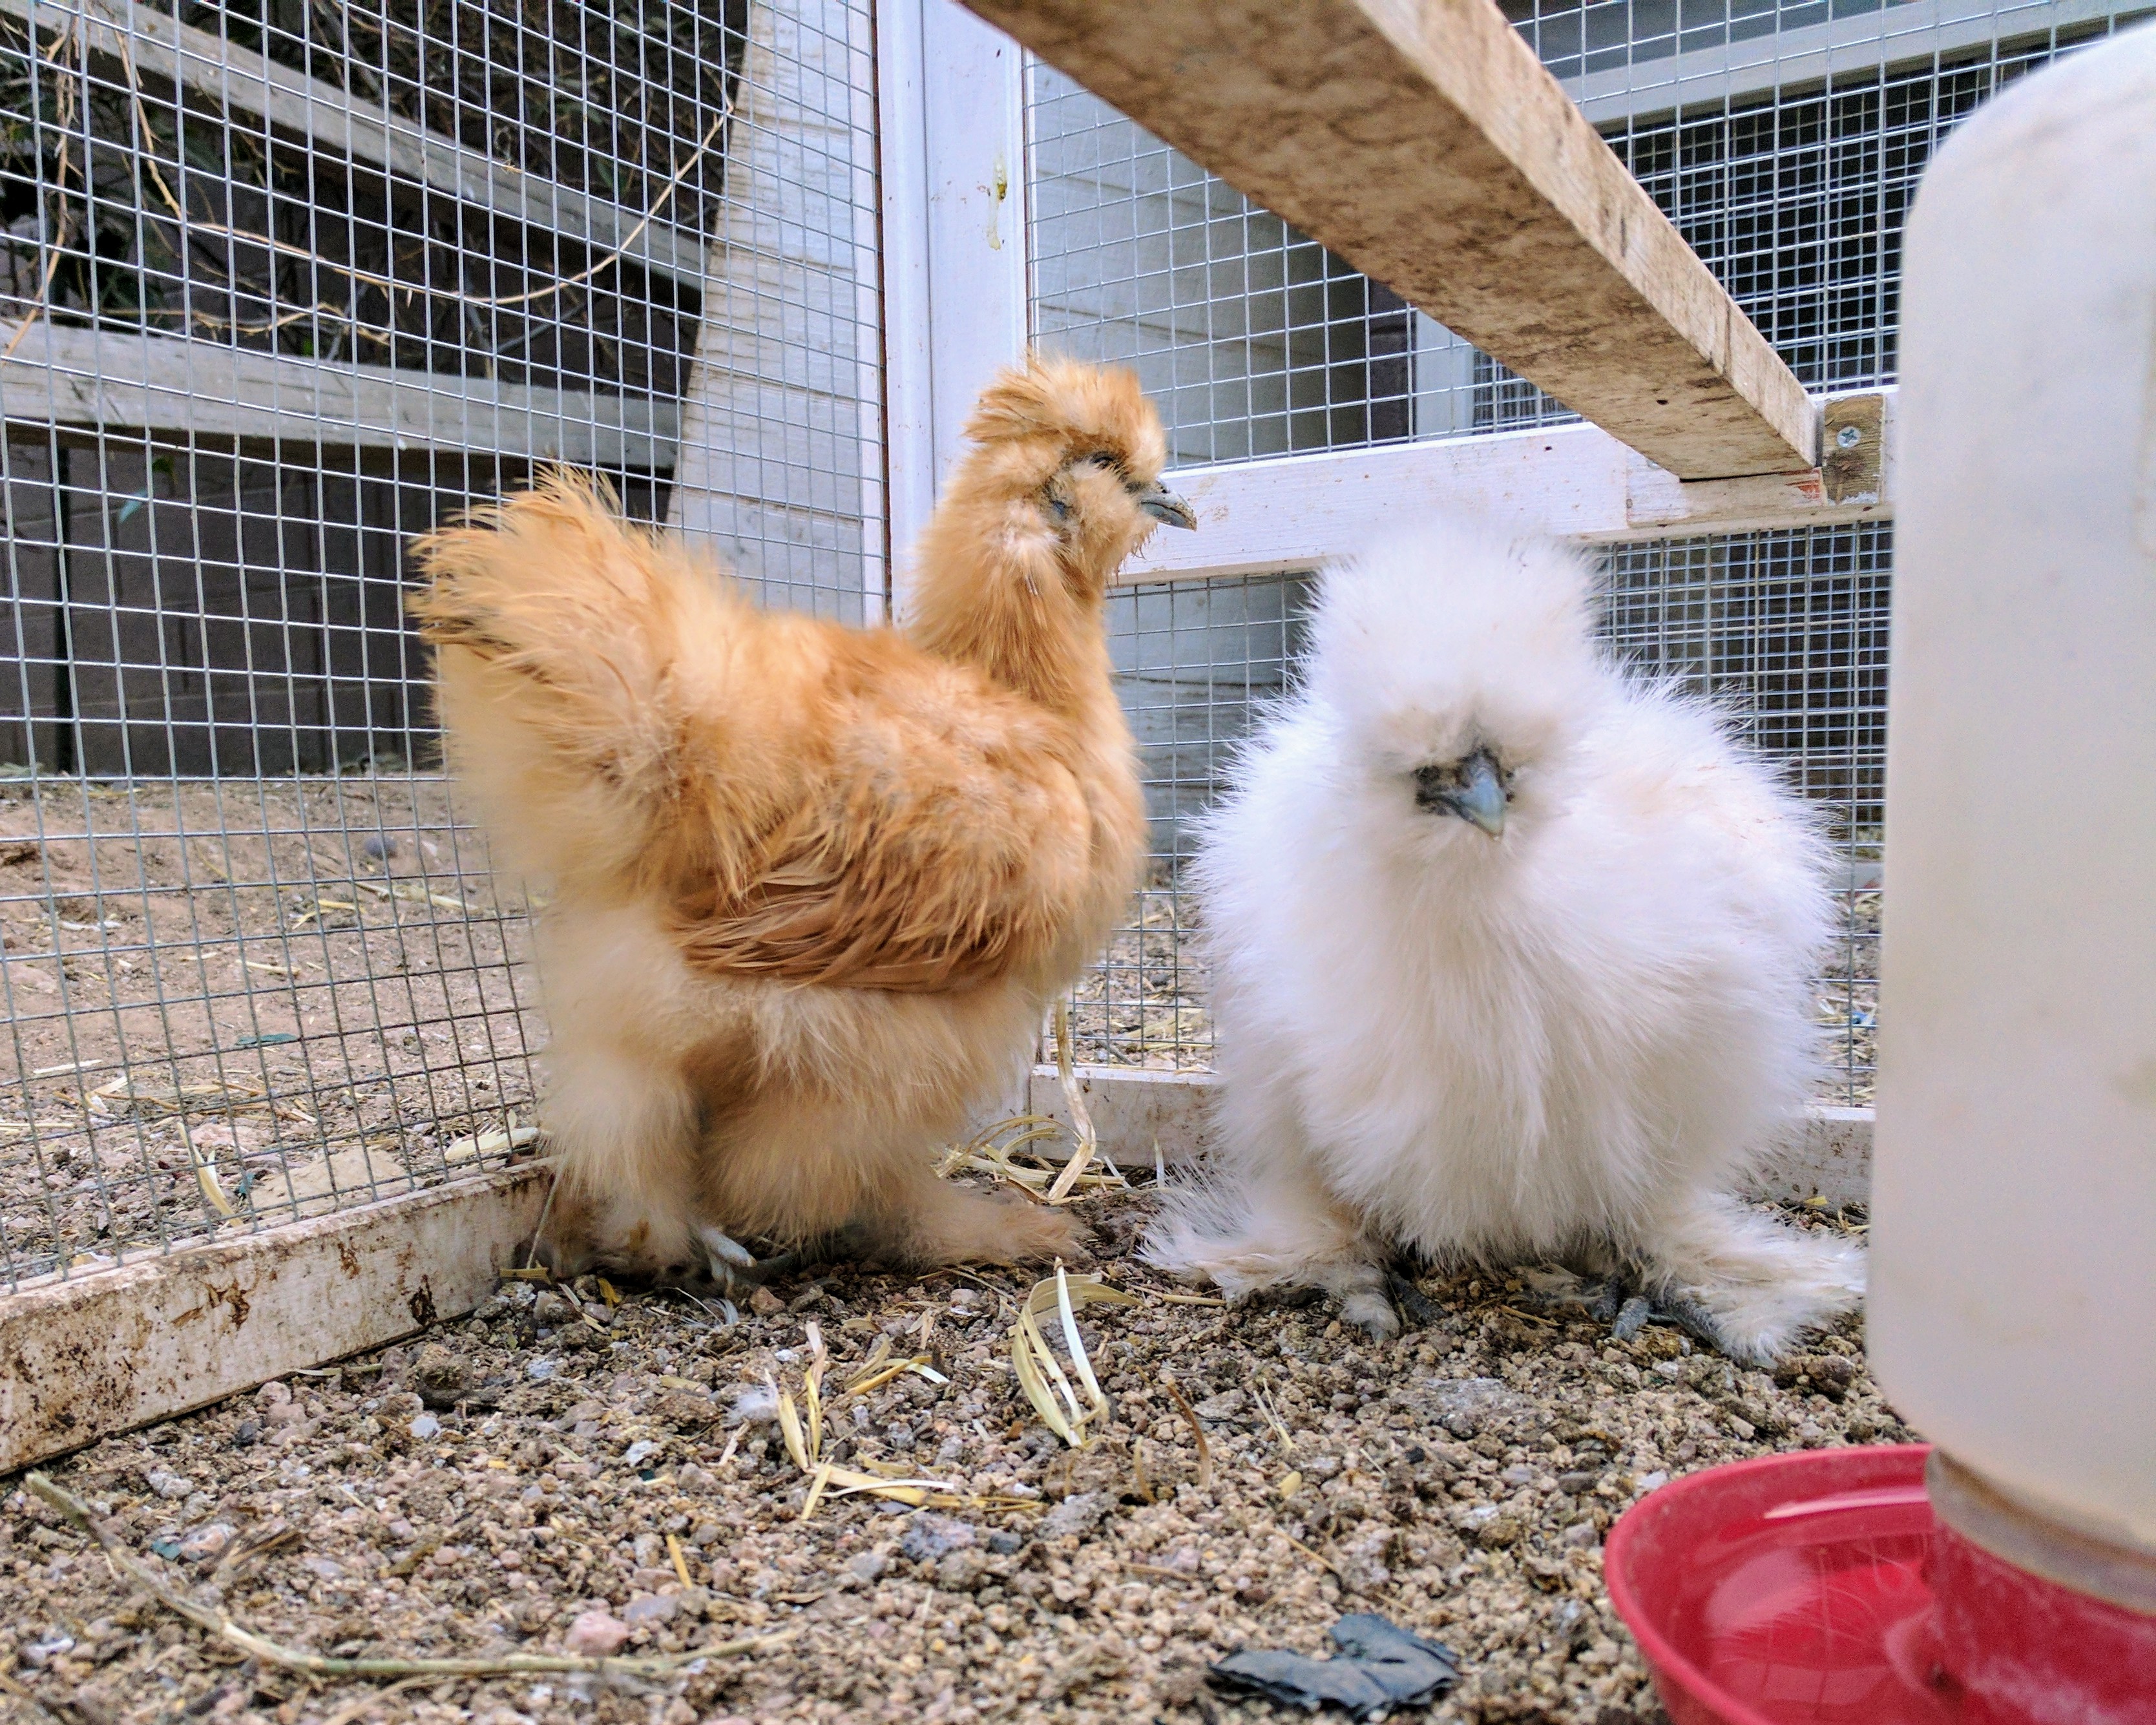 Buff and White Bantam Silkies, Approx. 8 weeks